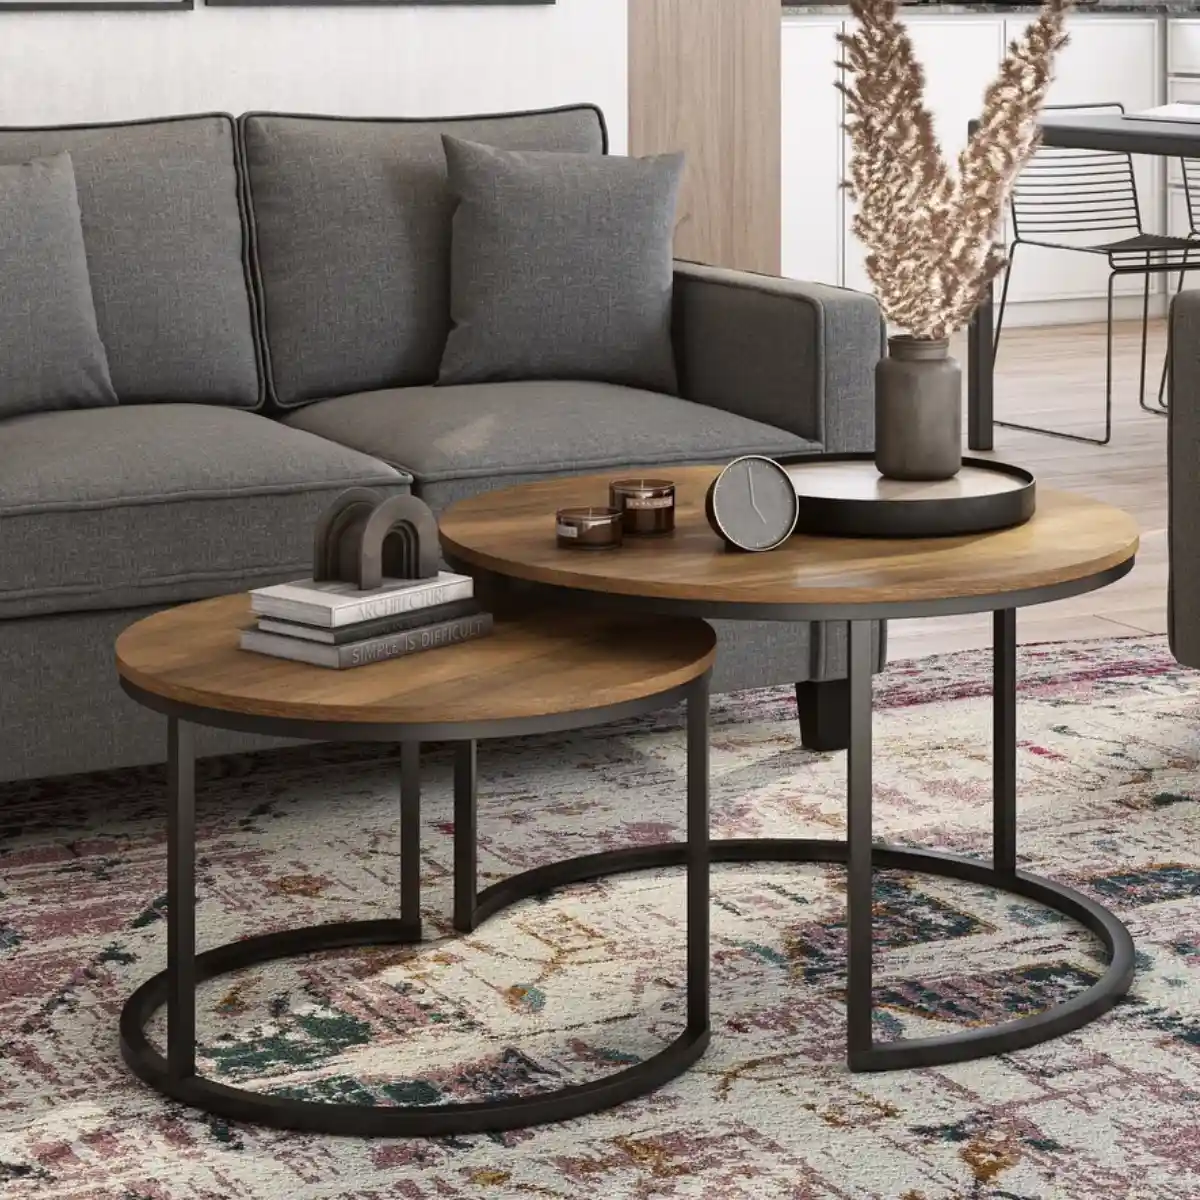 Pottery barn malcolm coffee table dupe overstock